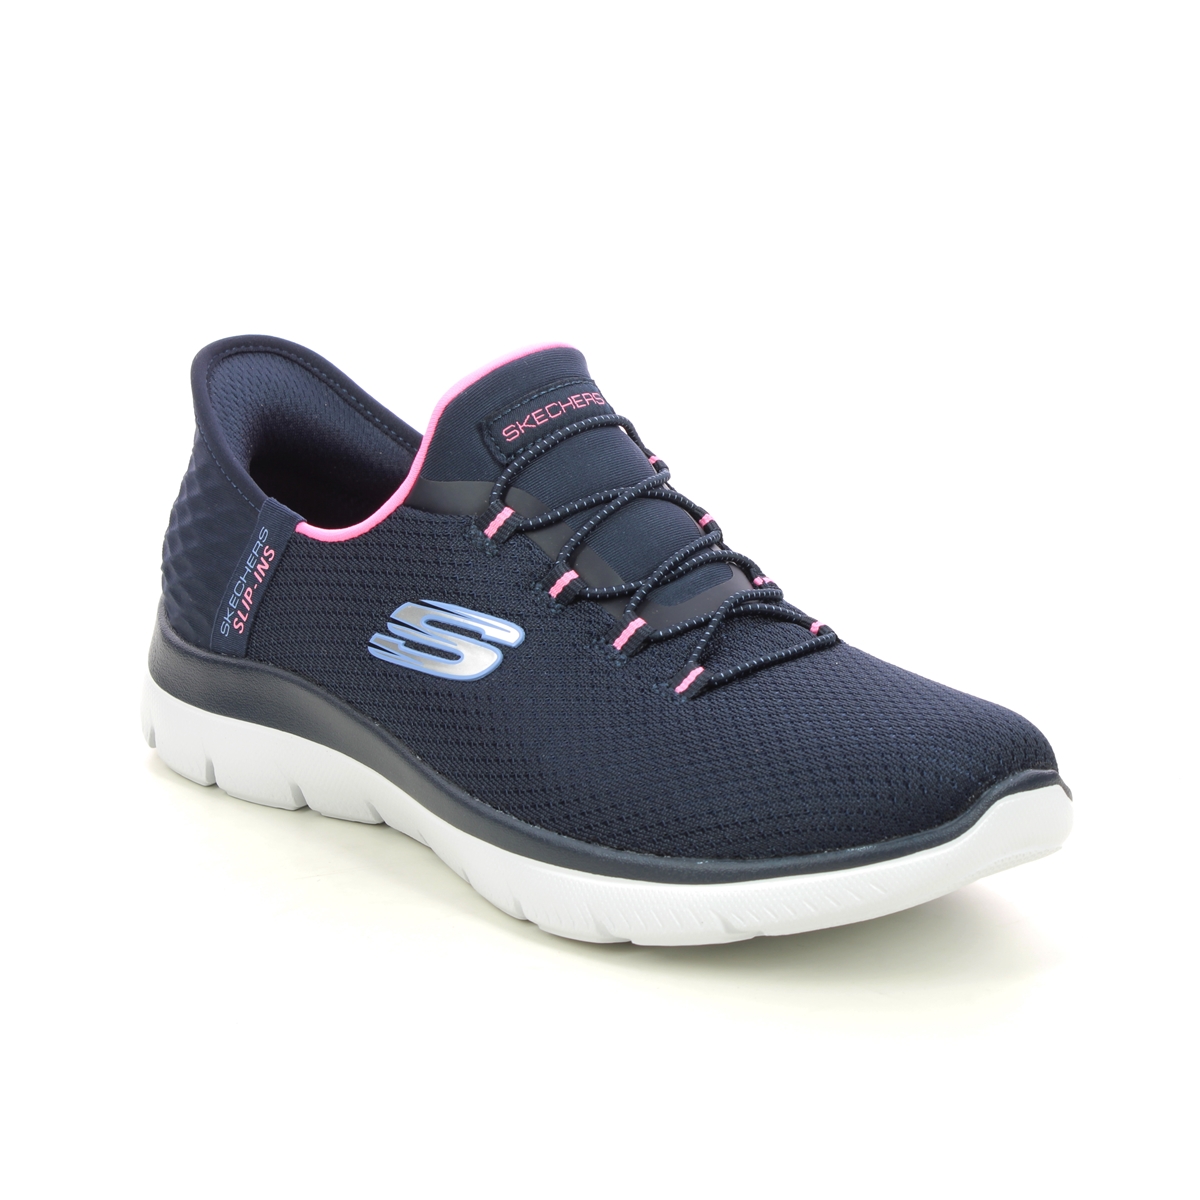 Skechers Slip Ins Summit NVPK Navy Pink Womens trainers 150123 in a Plain Textile in Size 6